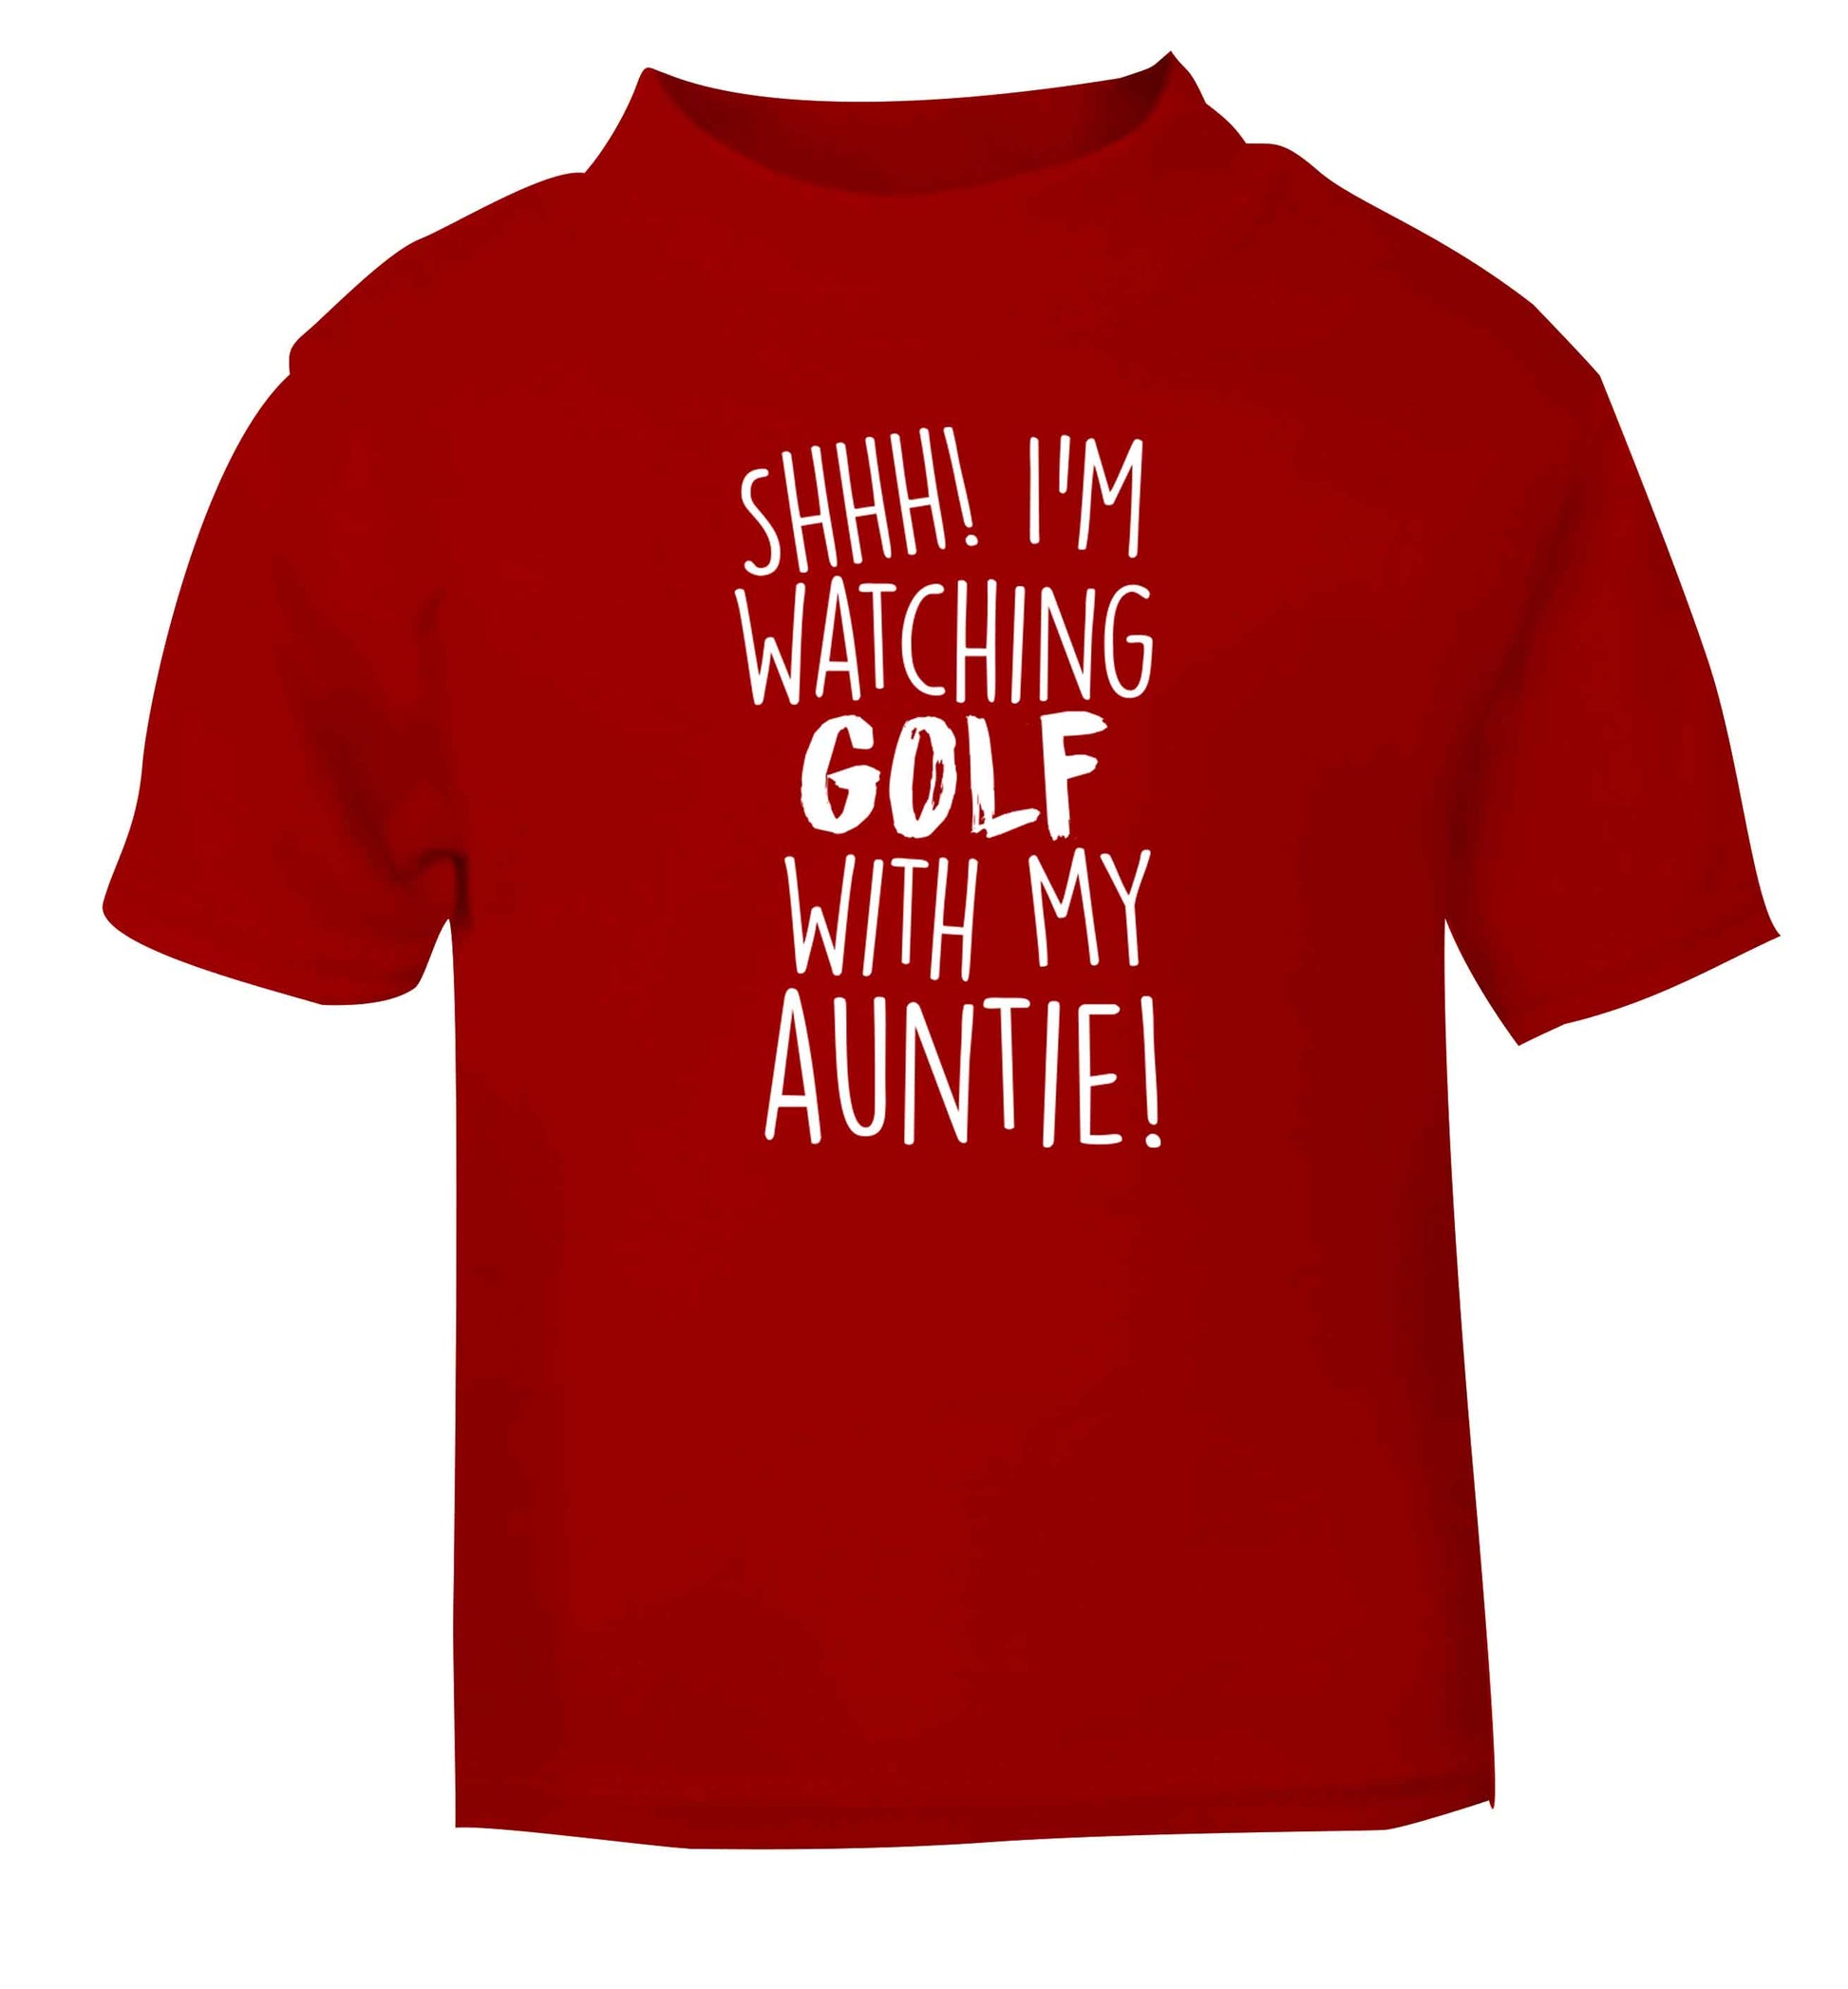 Shh I'm watching golf with my auntie red Baby Toddler Tshirt 2 Years